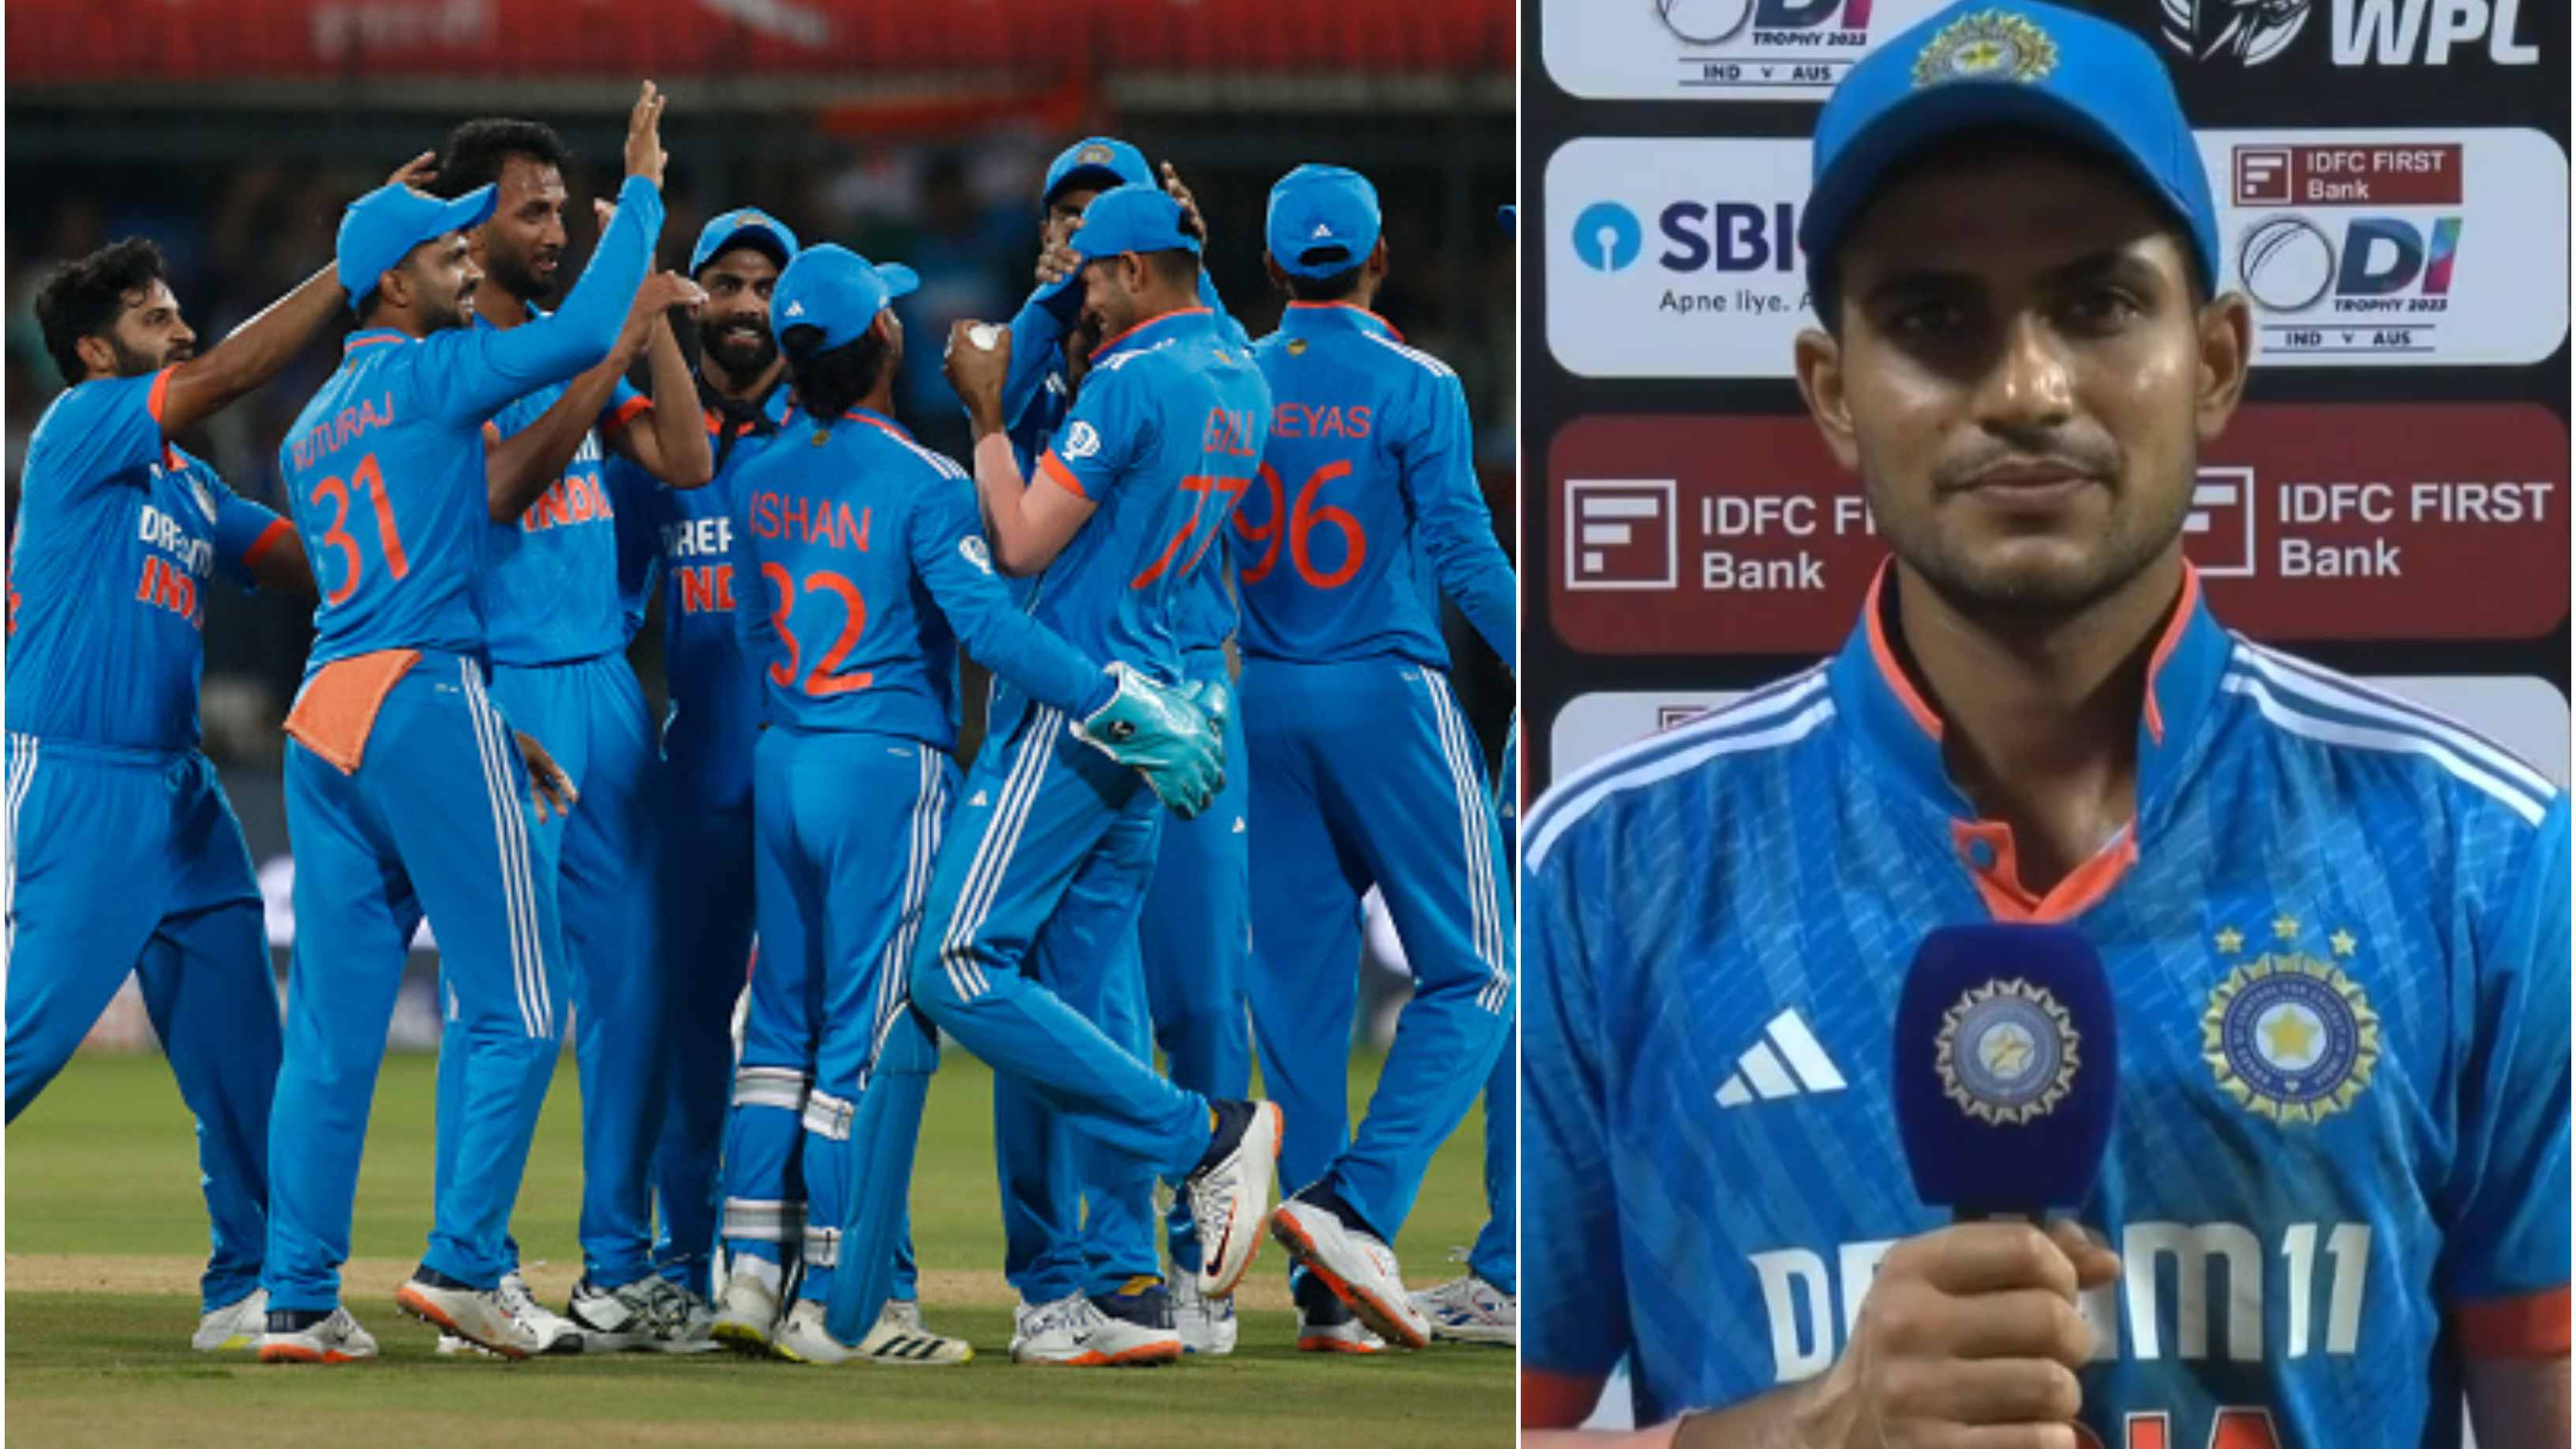 IND v AUS 2023: “We have momentum at the right time,” says Shubman Gill after series-clinching win in 2nd ODI